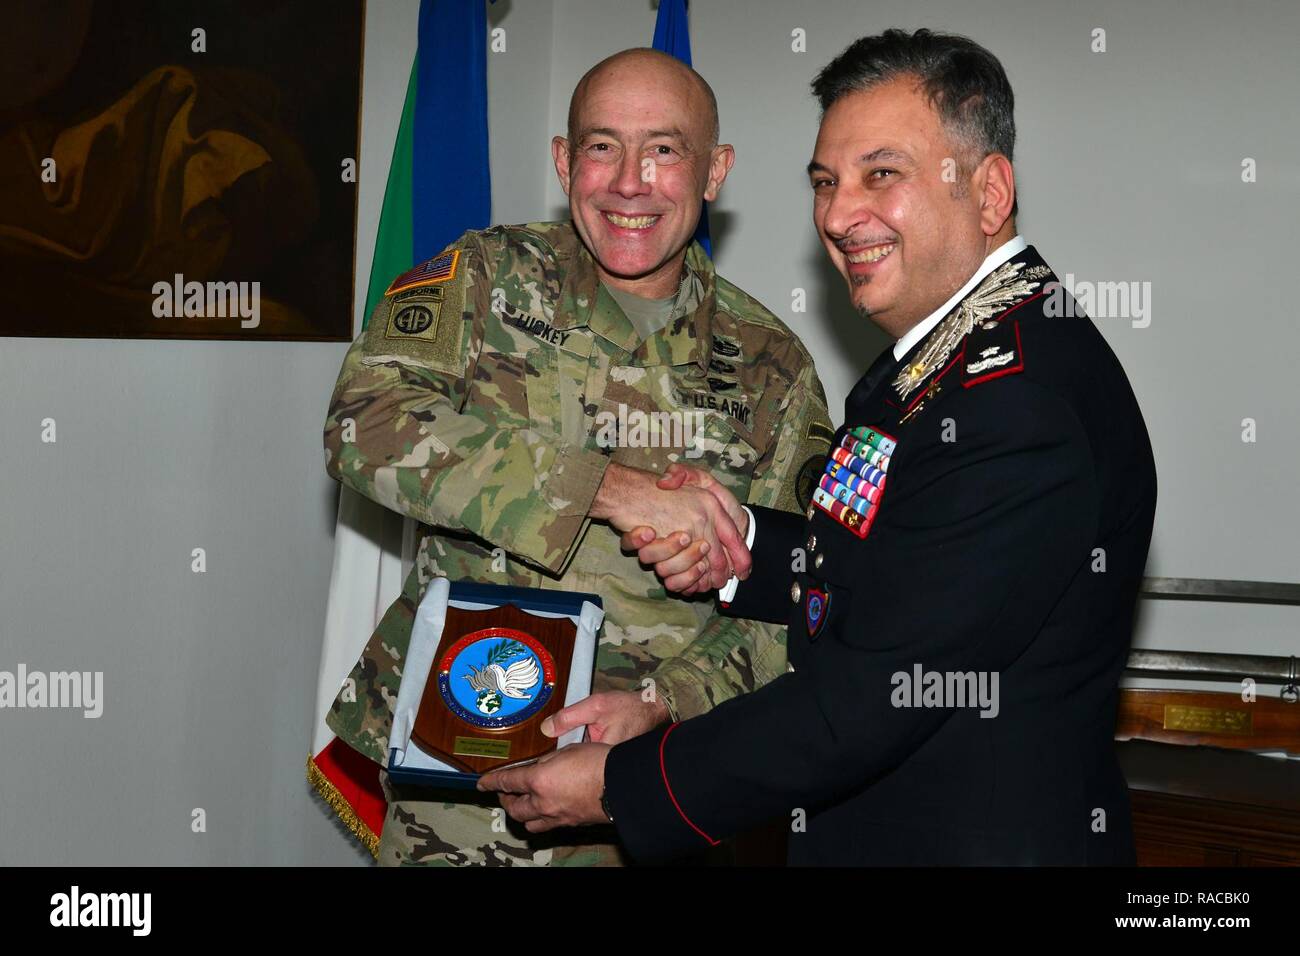 Brig. Gen. Giovanni Pietro Barbano (right), Center of Excellence for Stability Police Units (CoESPU) director, presents  Carabinieri CoESPU crest at Lt. Gen. Charles D. Luckey (left), Commanding General U.S. Army Reserve Command, during visit at Center of Excellence for Stability Police Units (CoESPU) Vicenza, Italy, January 20, 2017. Stock Photo